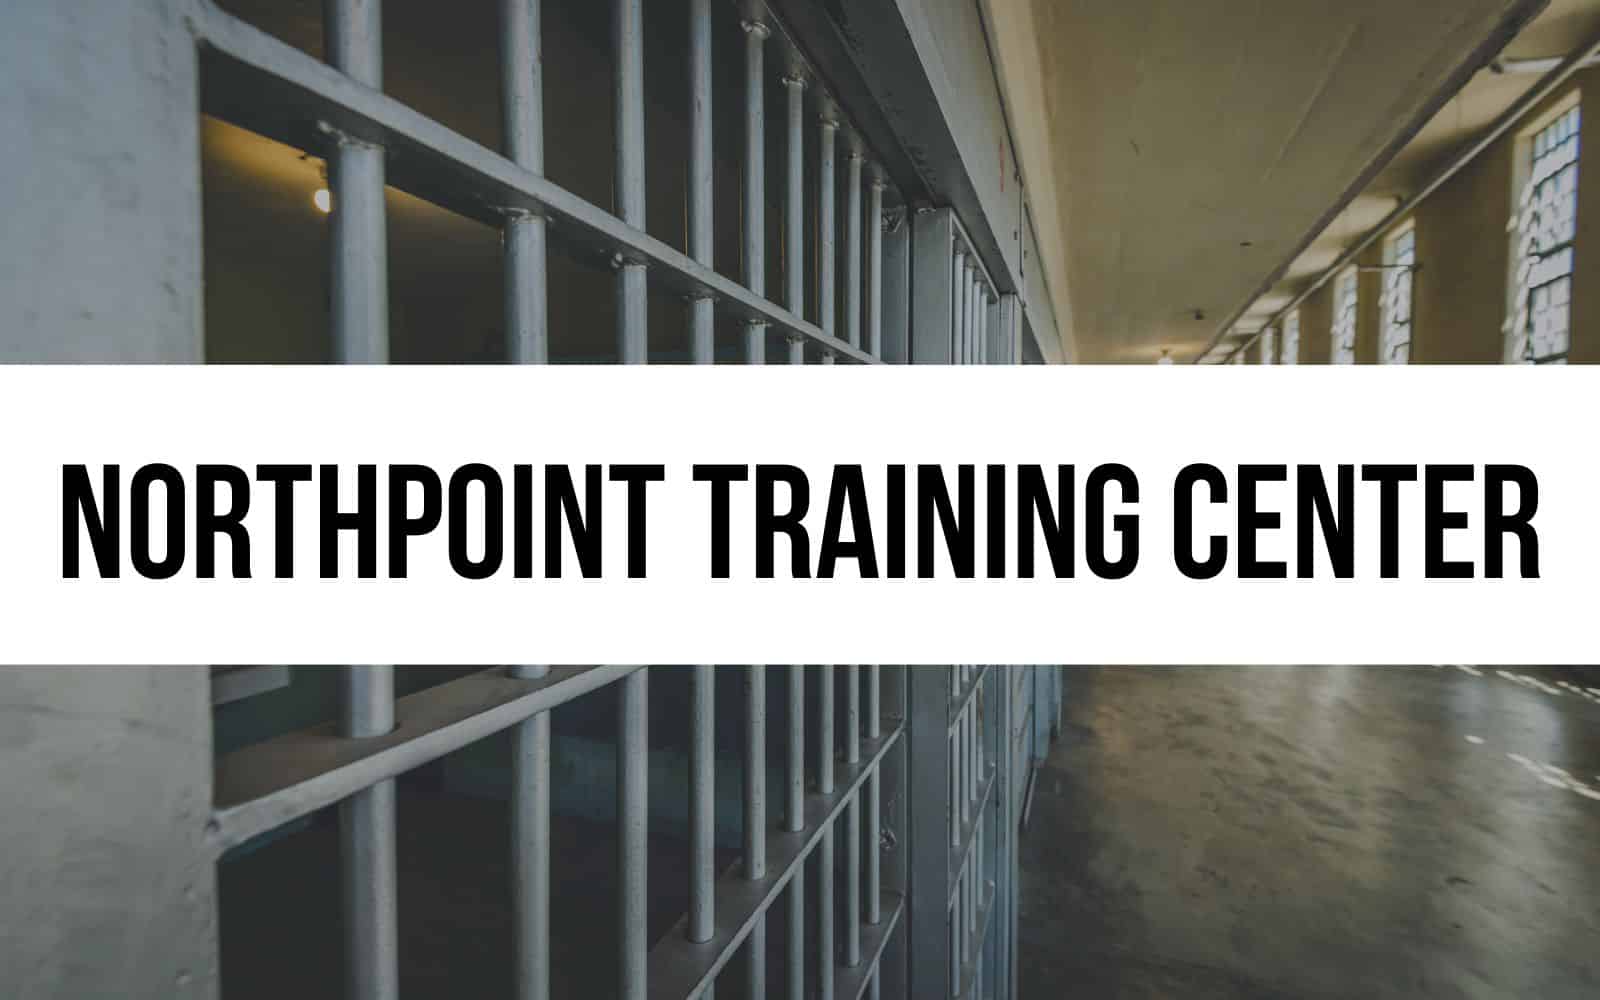 Northpoint Training Center